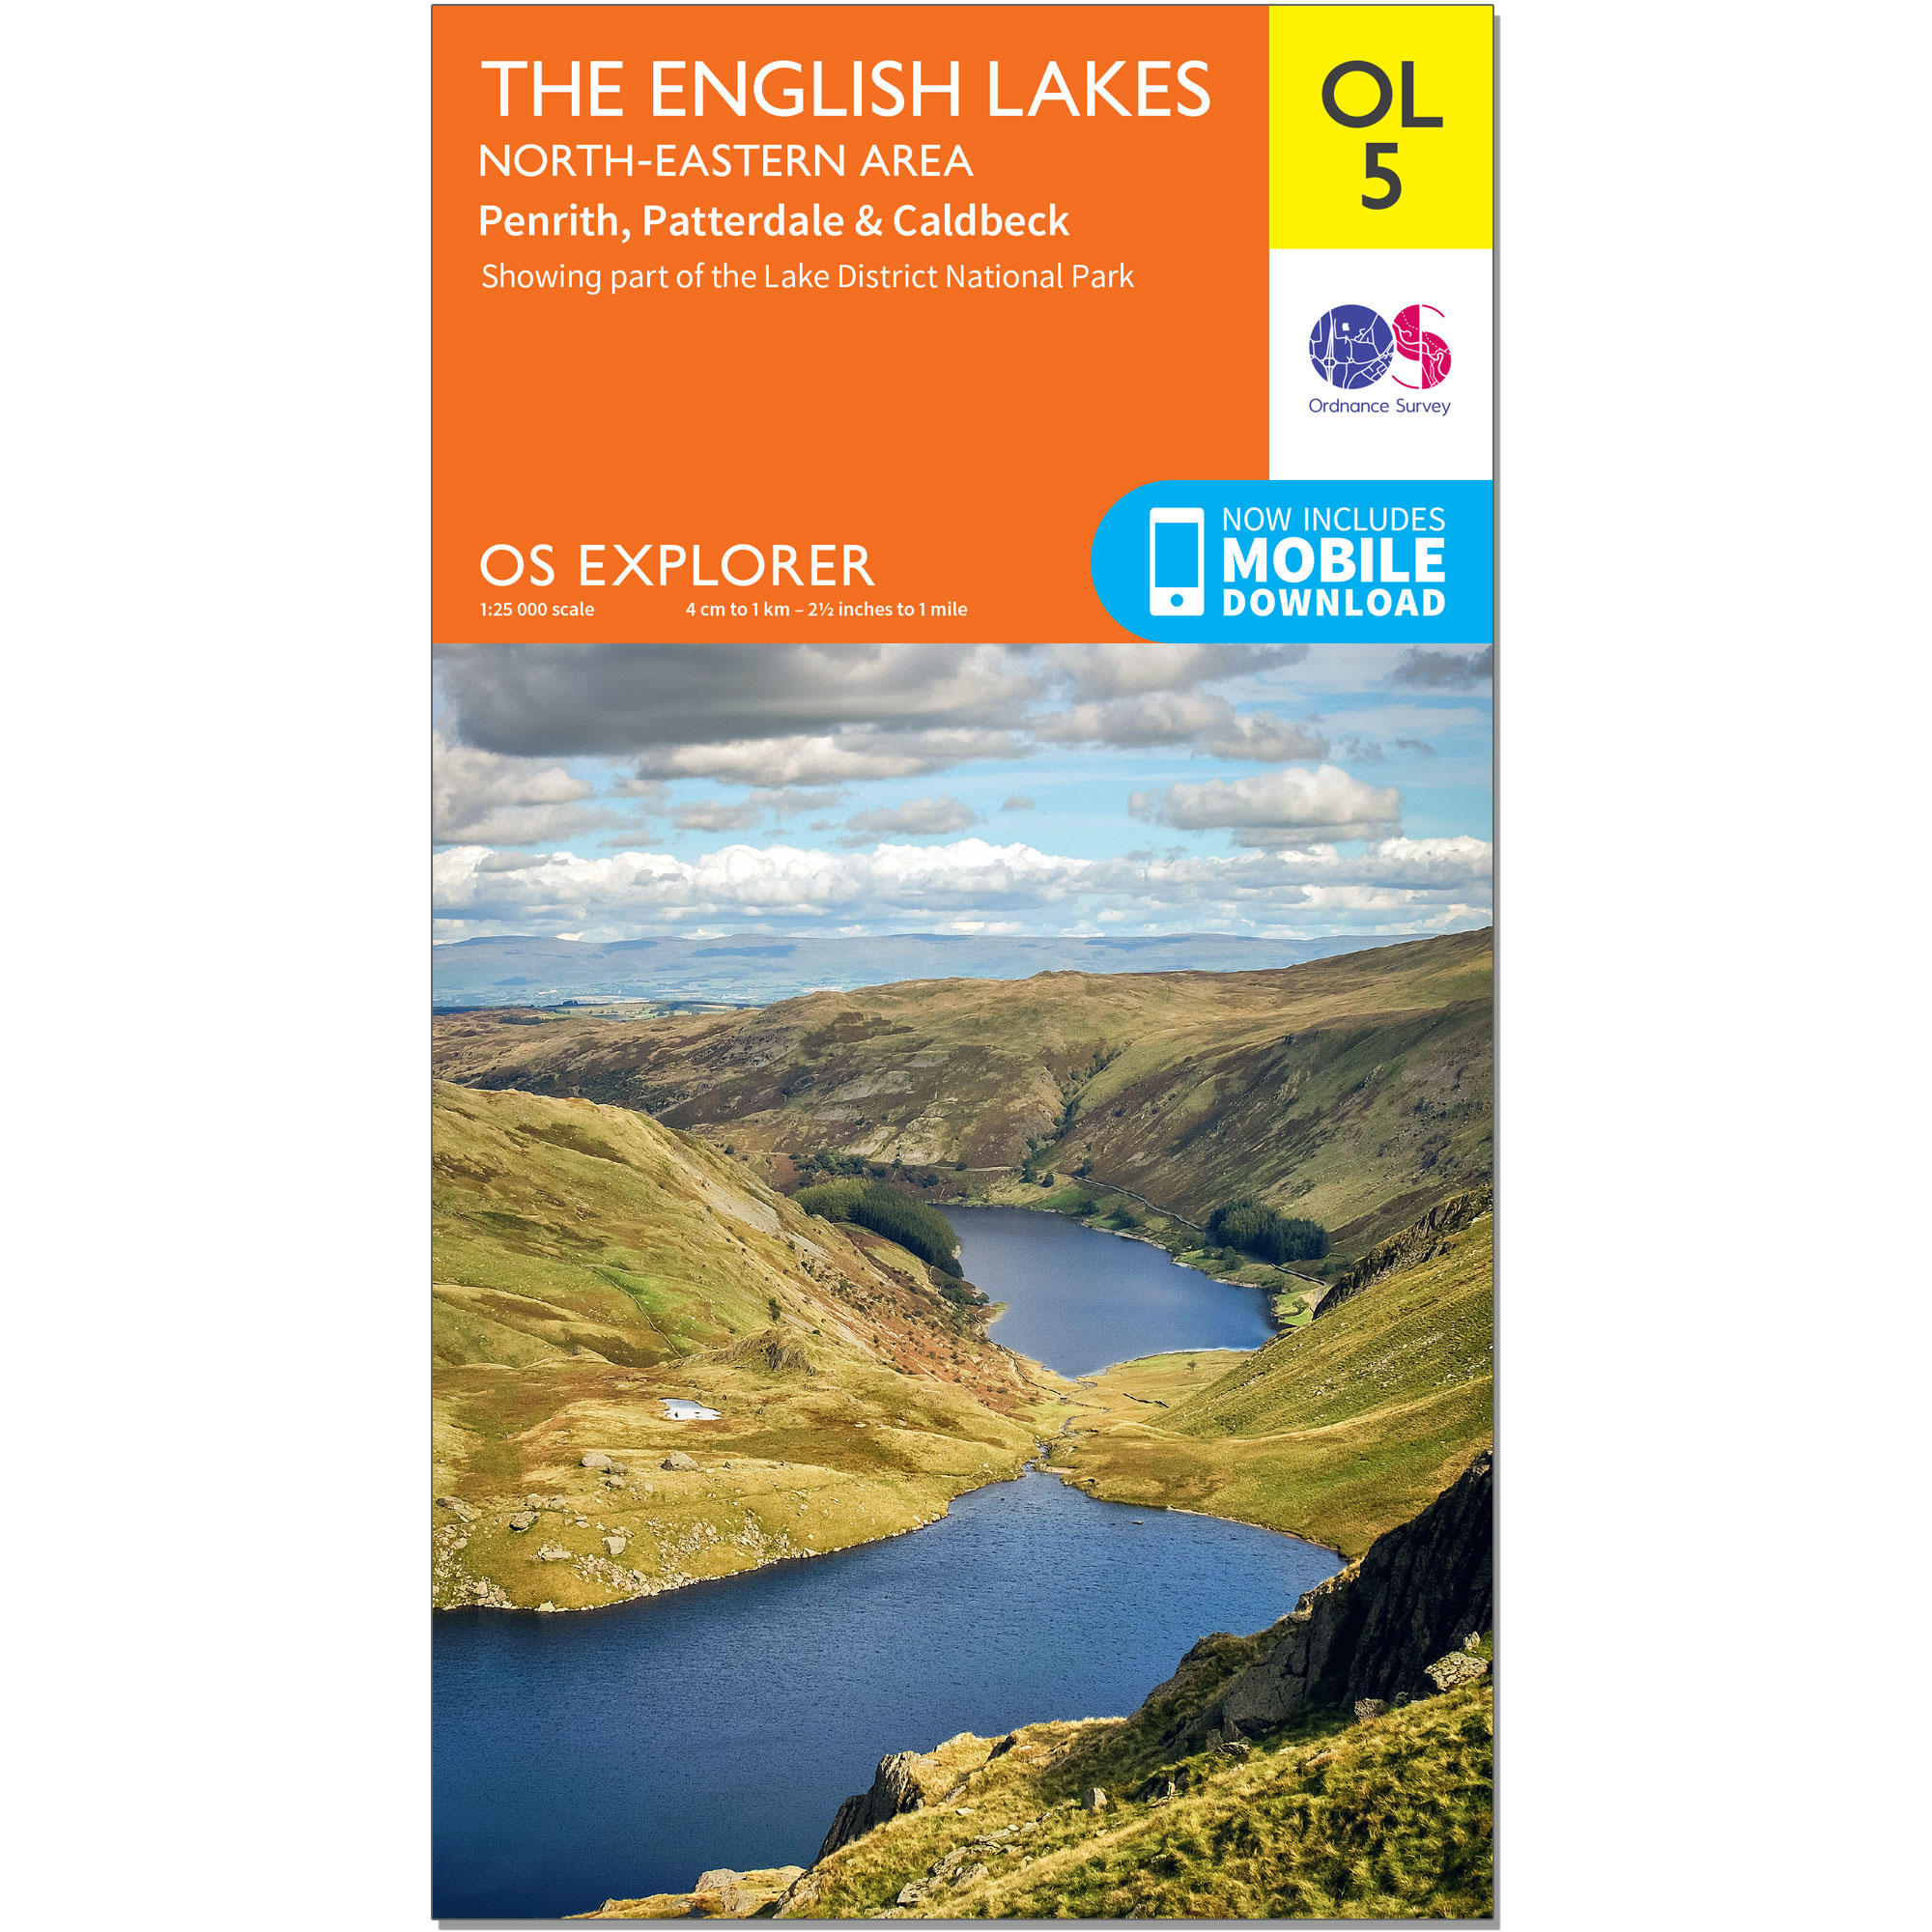 OS Explorer Map - The English Lakes - North Eastern 1/2